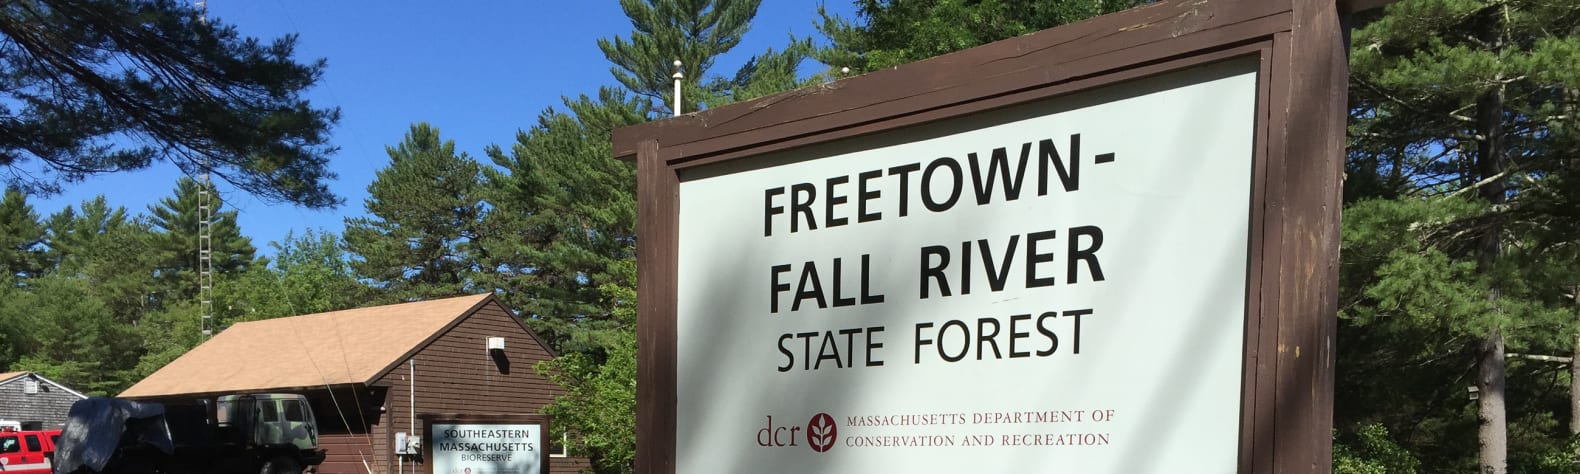 Freetown-Fall River State Forest